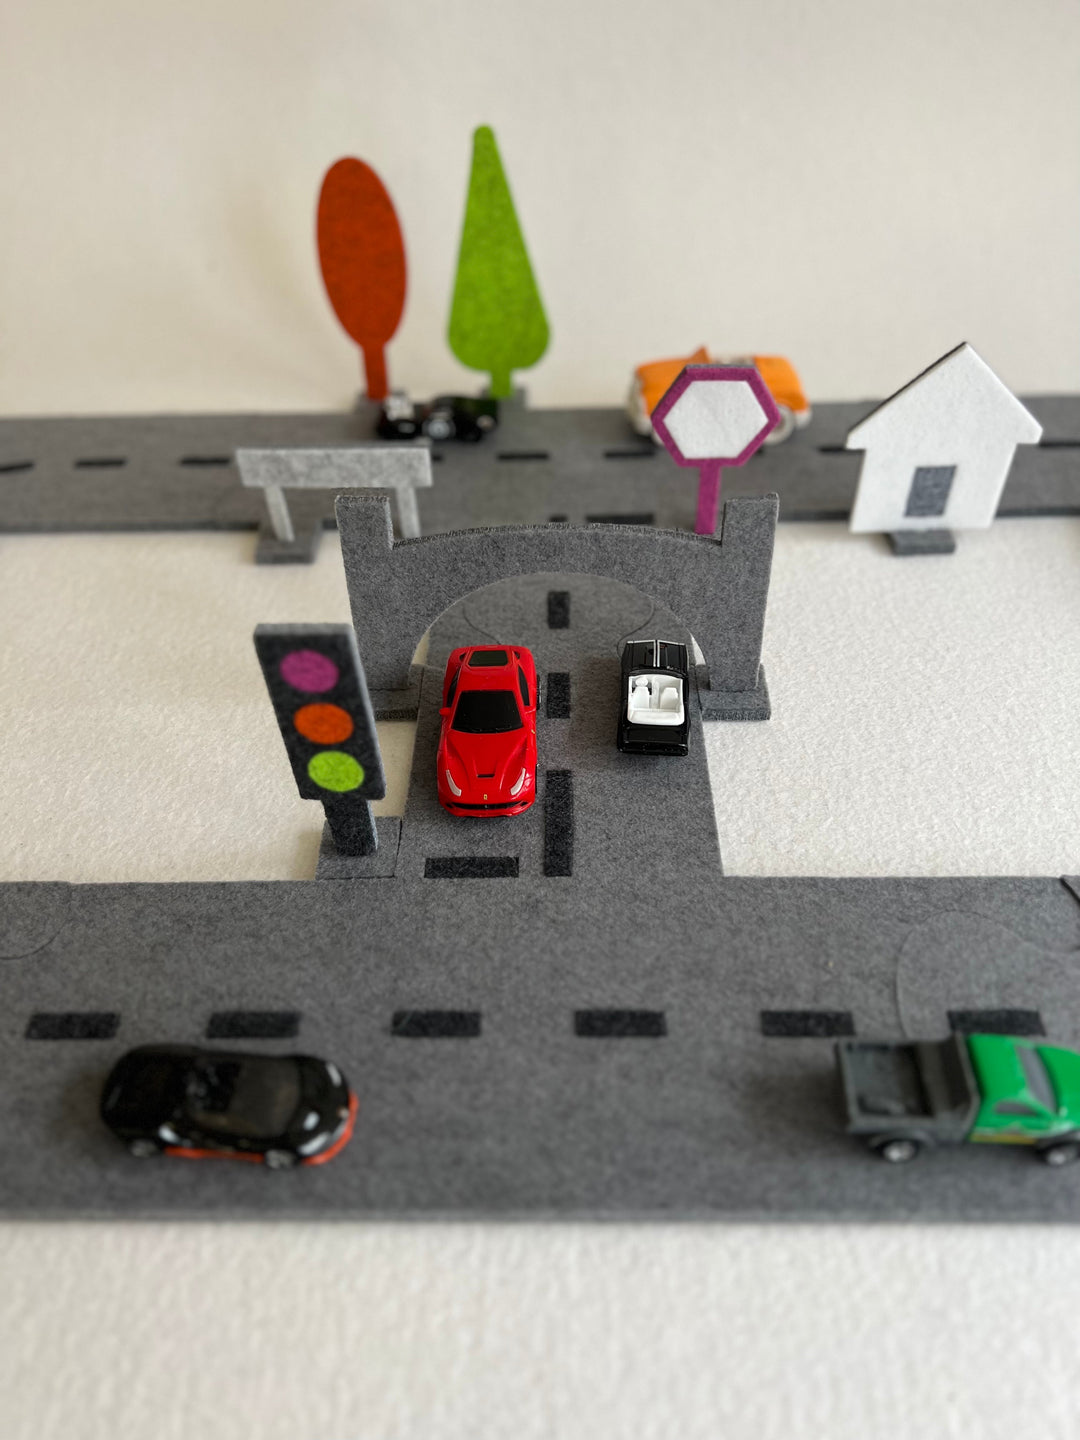 Constructor car track with city accessories-mini